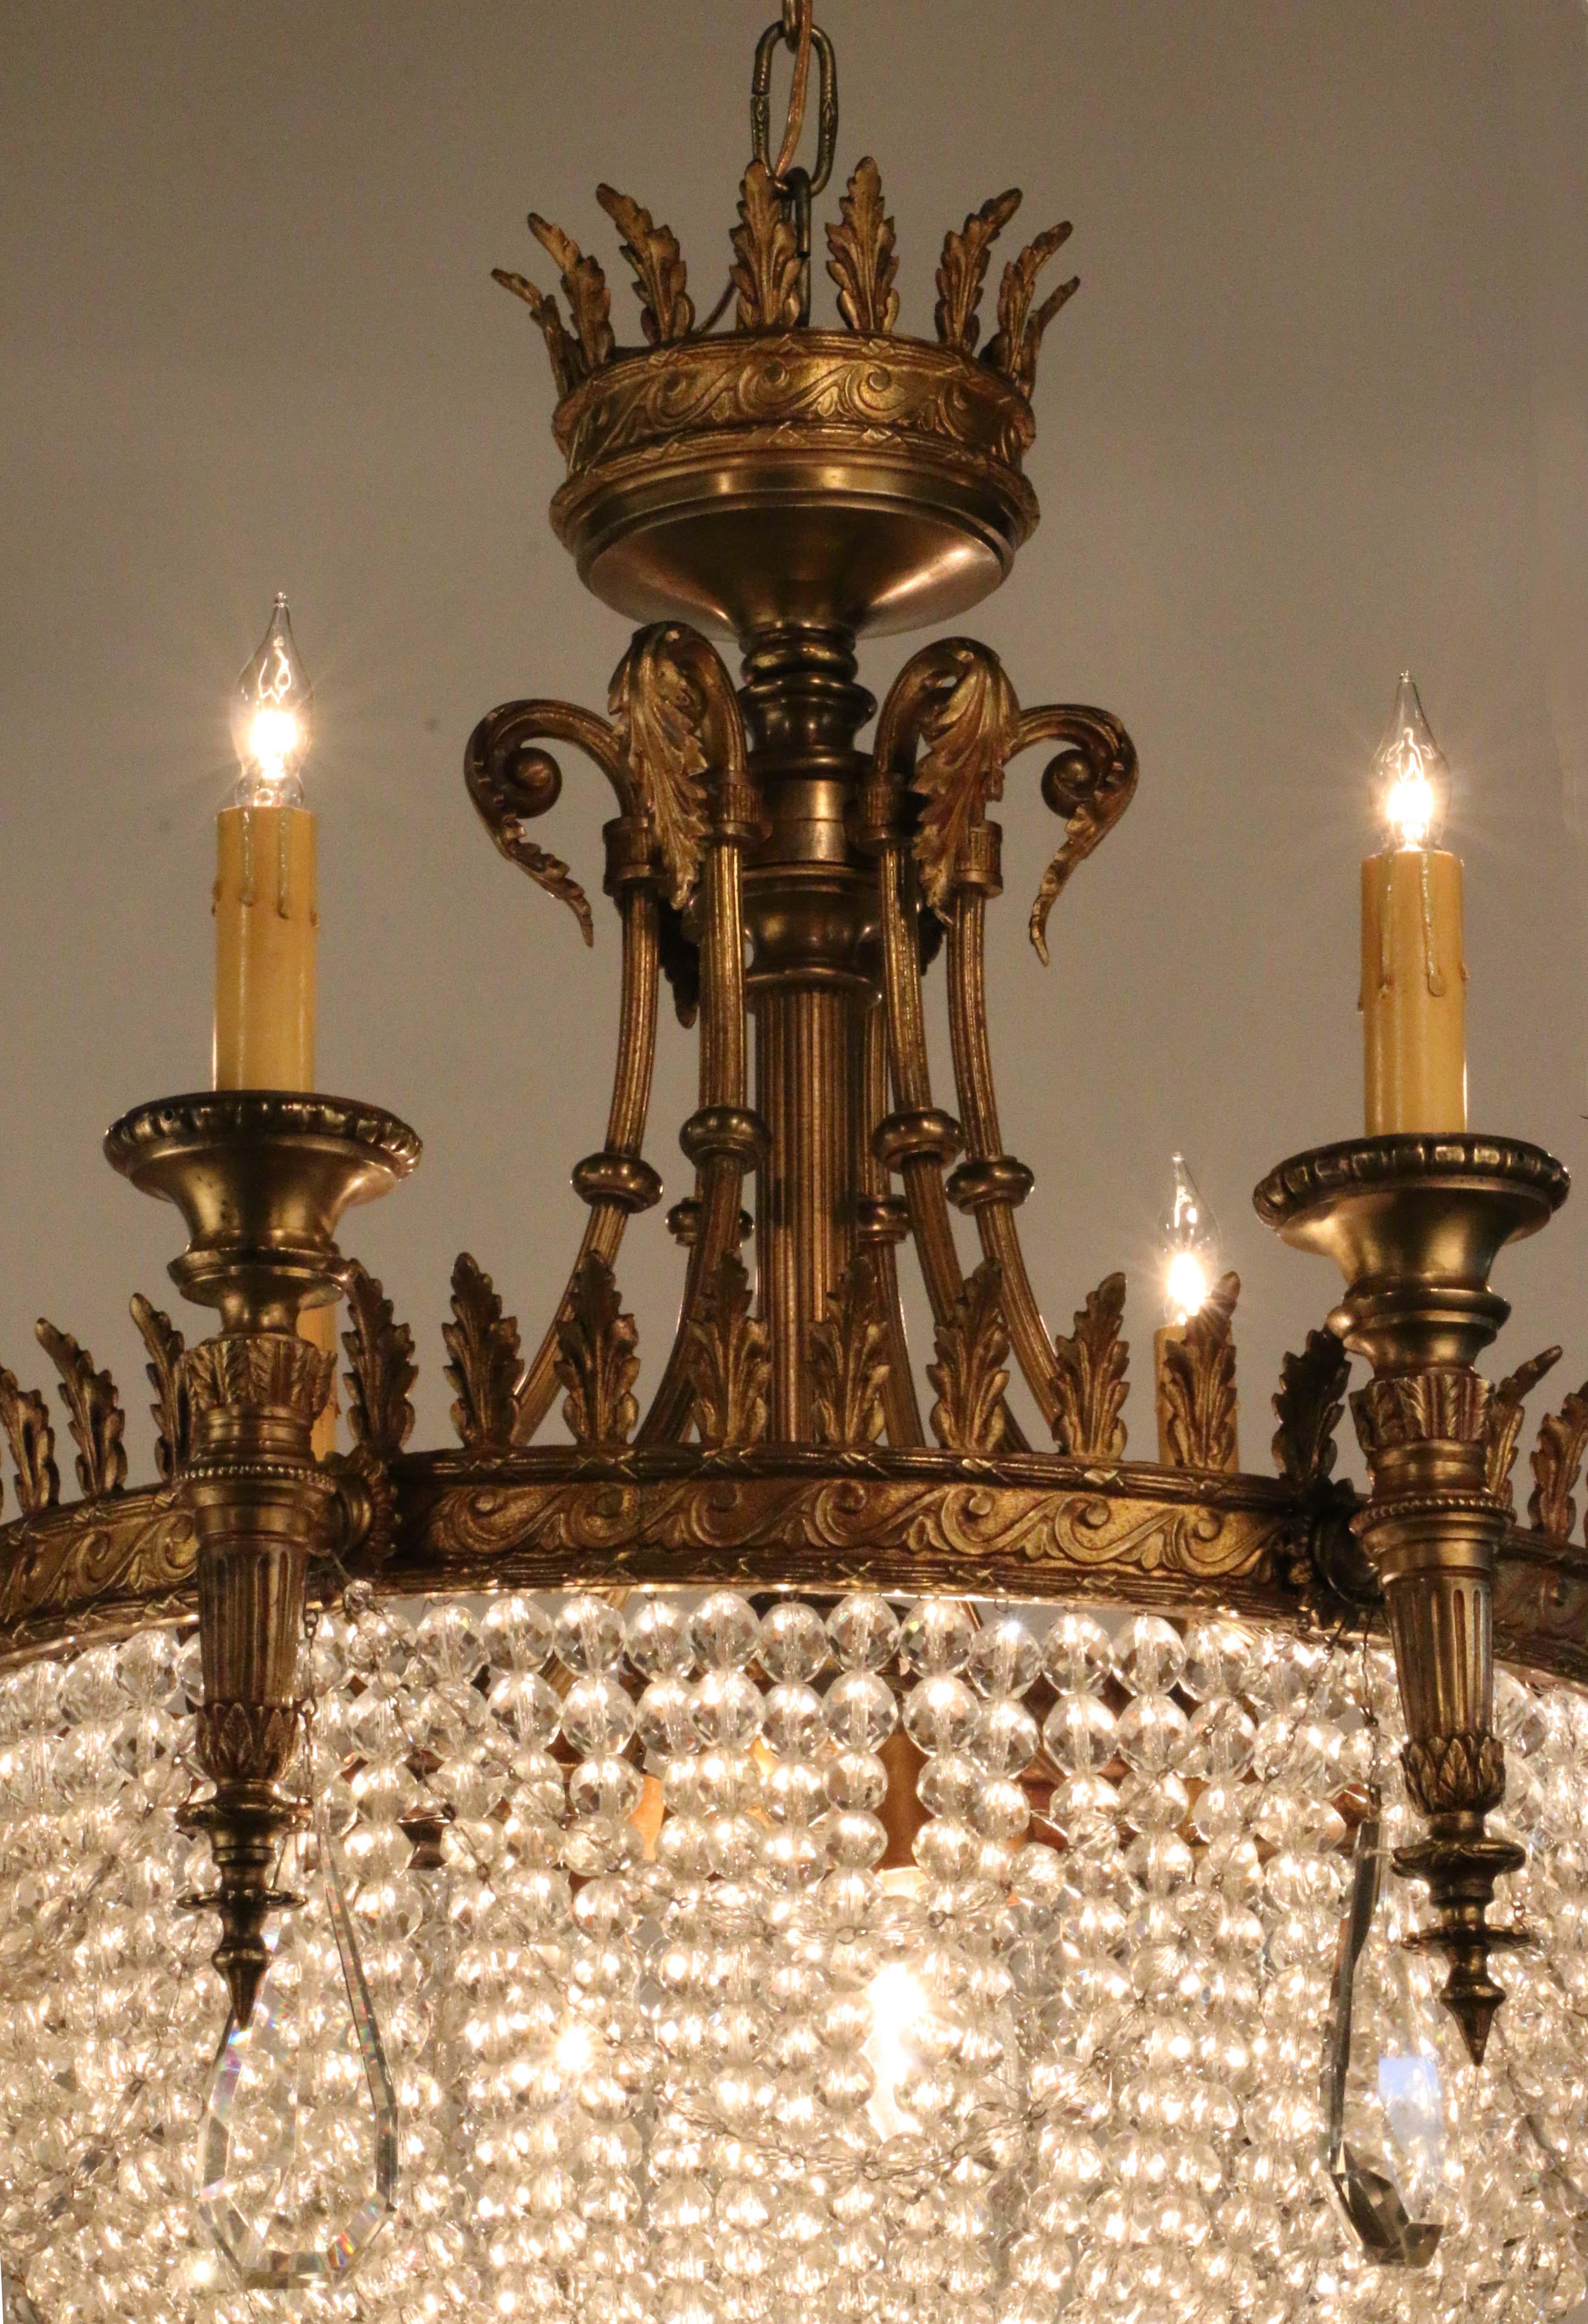 This is a Classic Louis XVI style, offering a highly decorative light source filtered through exquisite graduated lead crystal beads, together with six torch-shaped electrified 